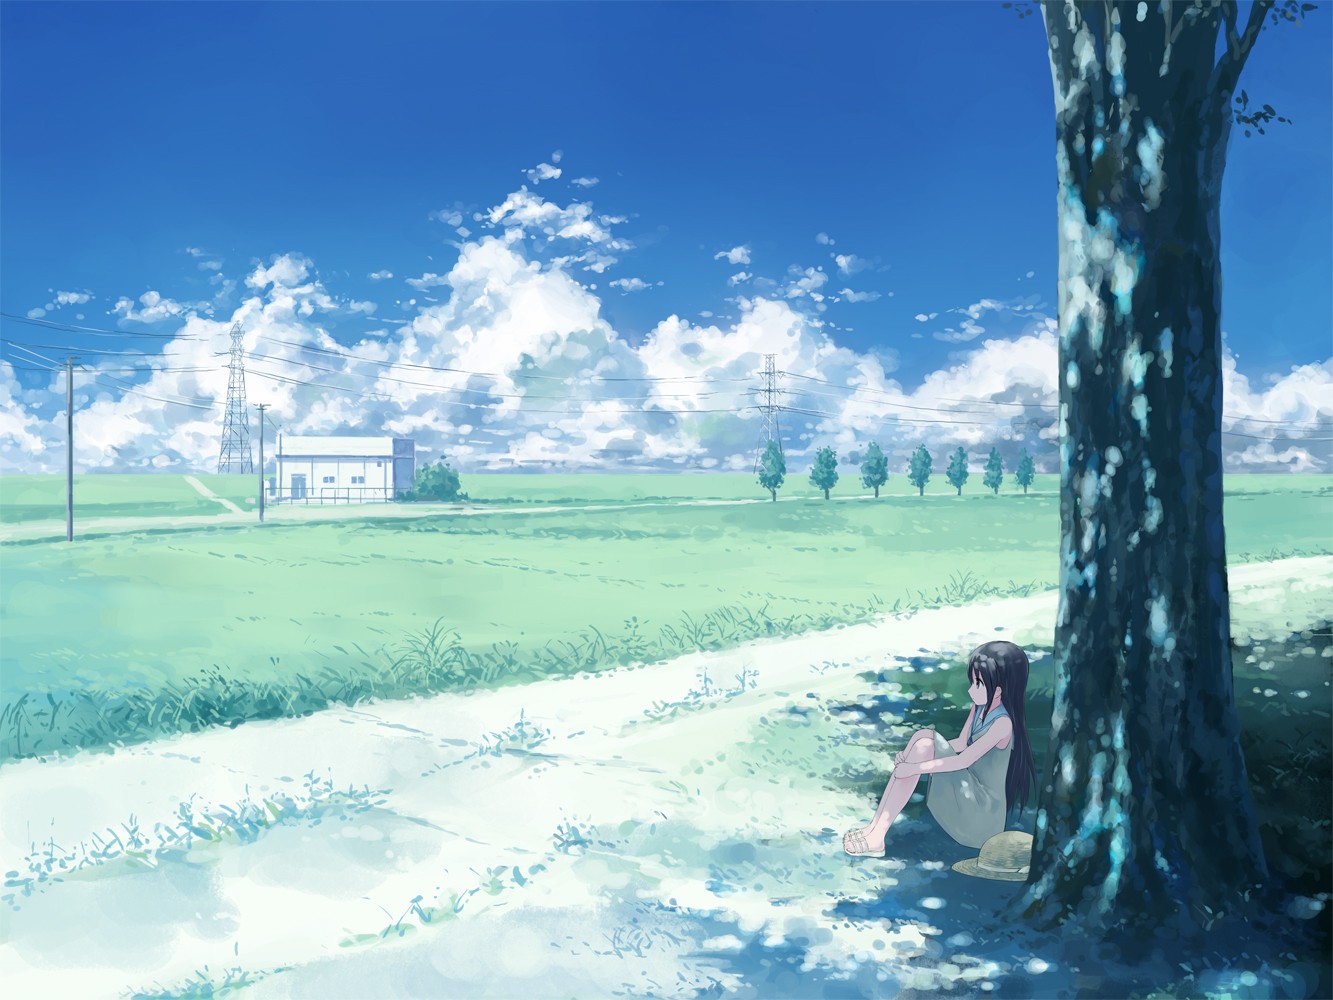 Free Download Scenic Anime Wallpaper 1333x1000 Scenic Anime 1333x1000 For Your Desktop Mobile Tablet Explore 48 Animated Scenic Wallpapers Free Scenic Wallpaper Scenic Images Wallpapers Scenic Reflections Wallpaper